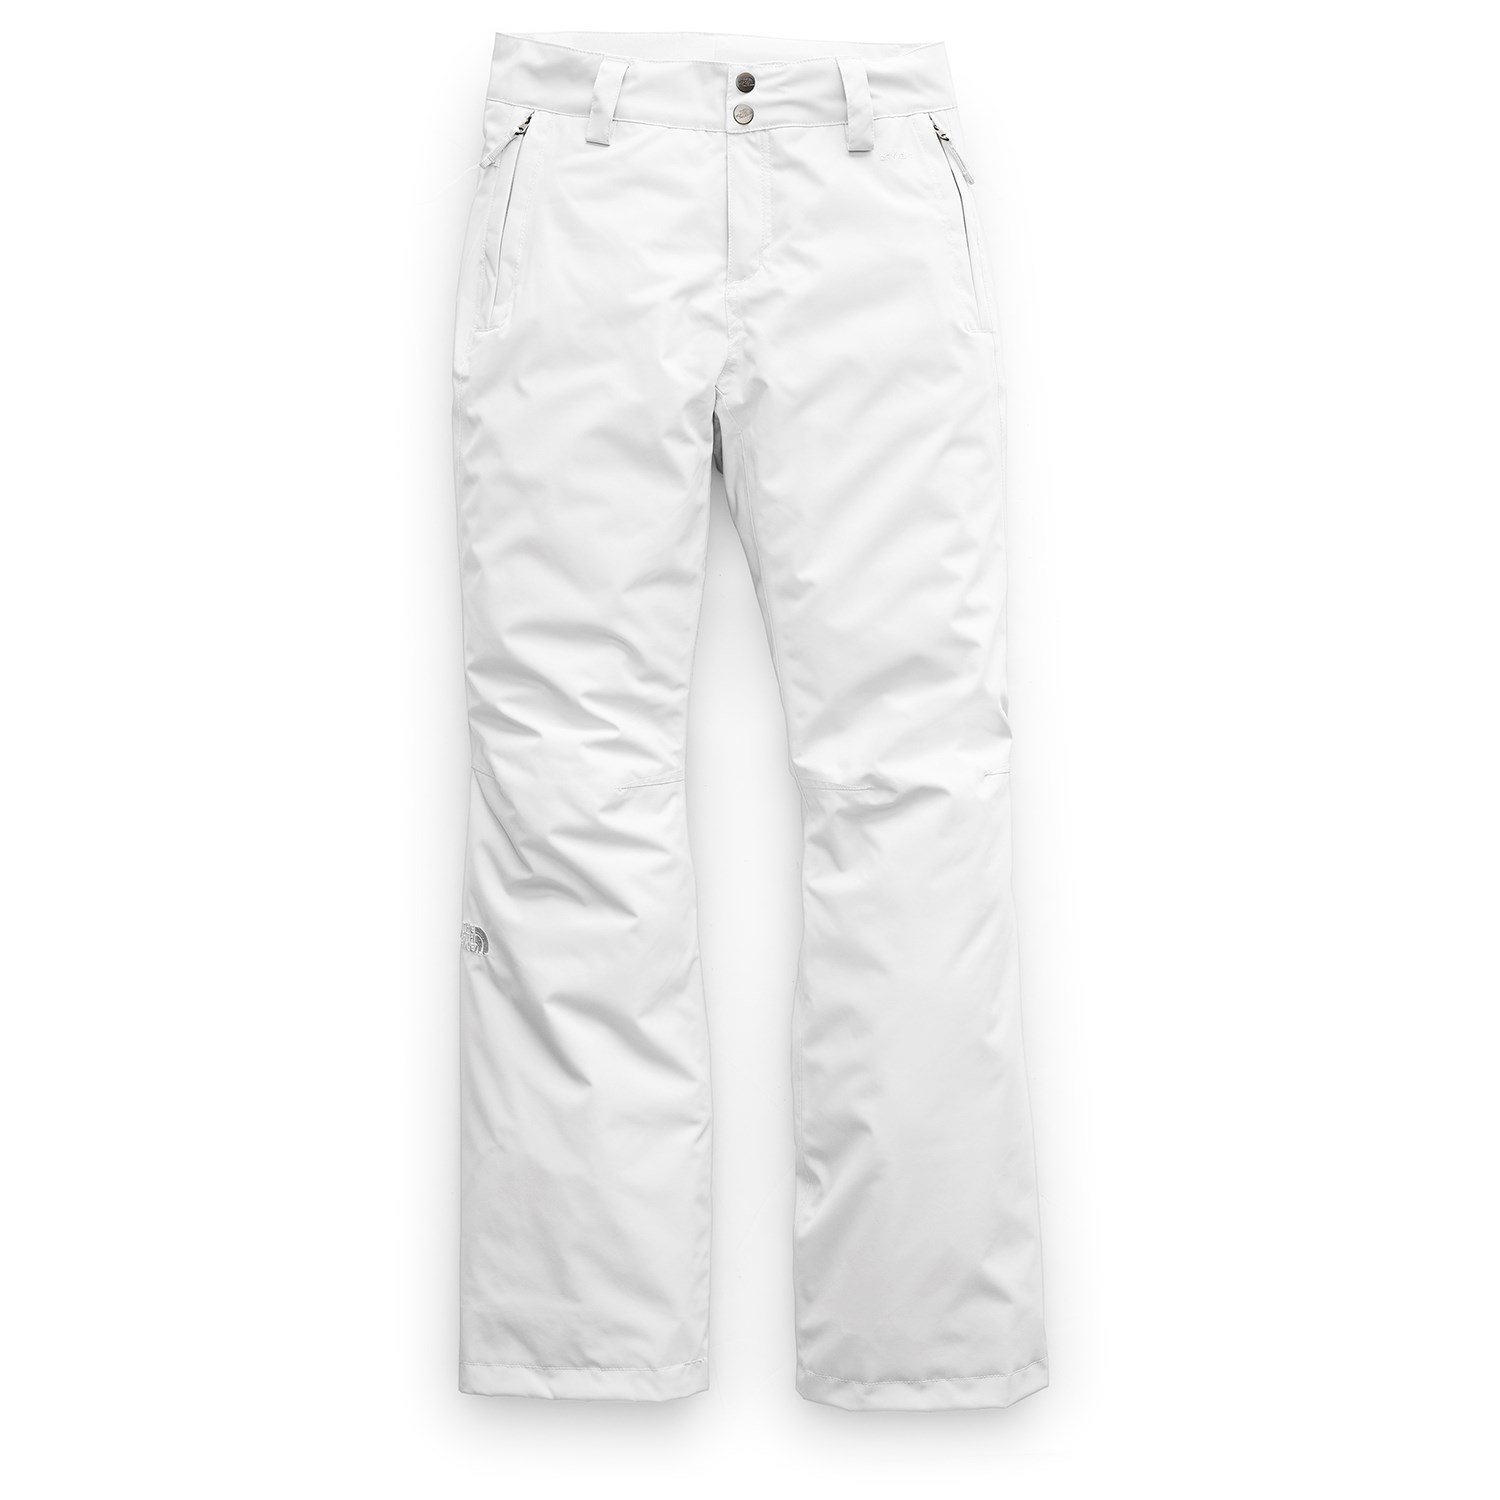 w sally pant north face